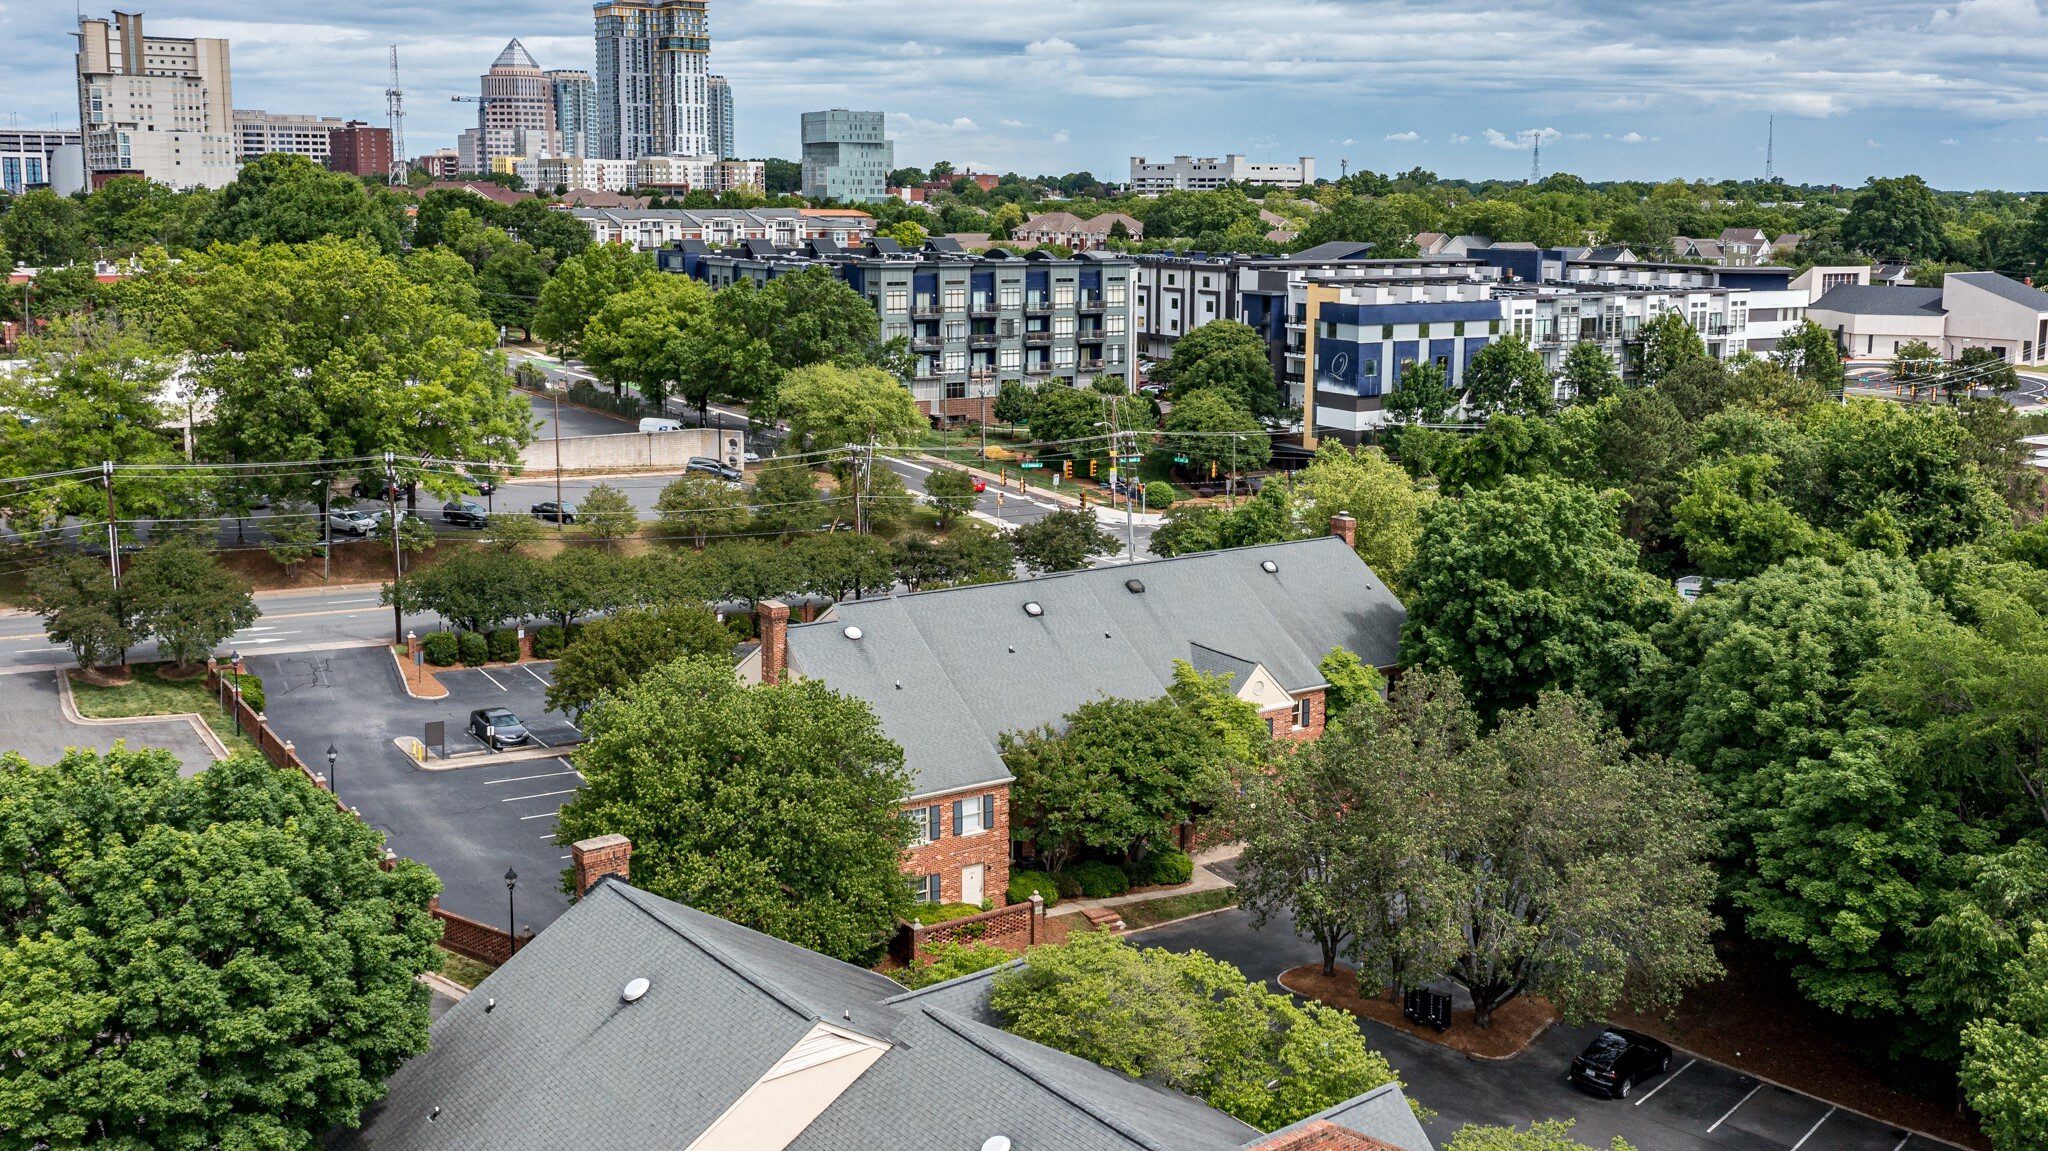 216-N-Mcdowell-St-Charlotte-NC-037_Drone-View-4-LargeHighDefinition